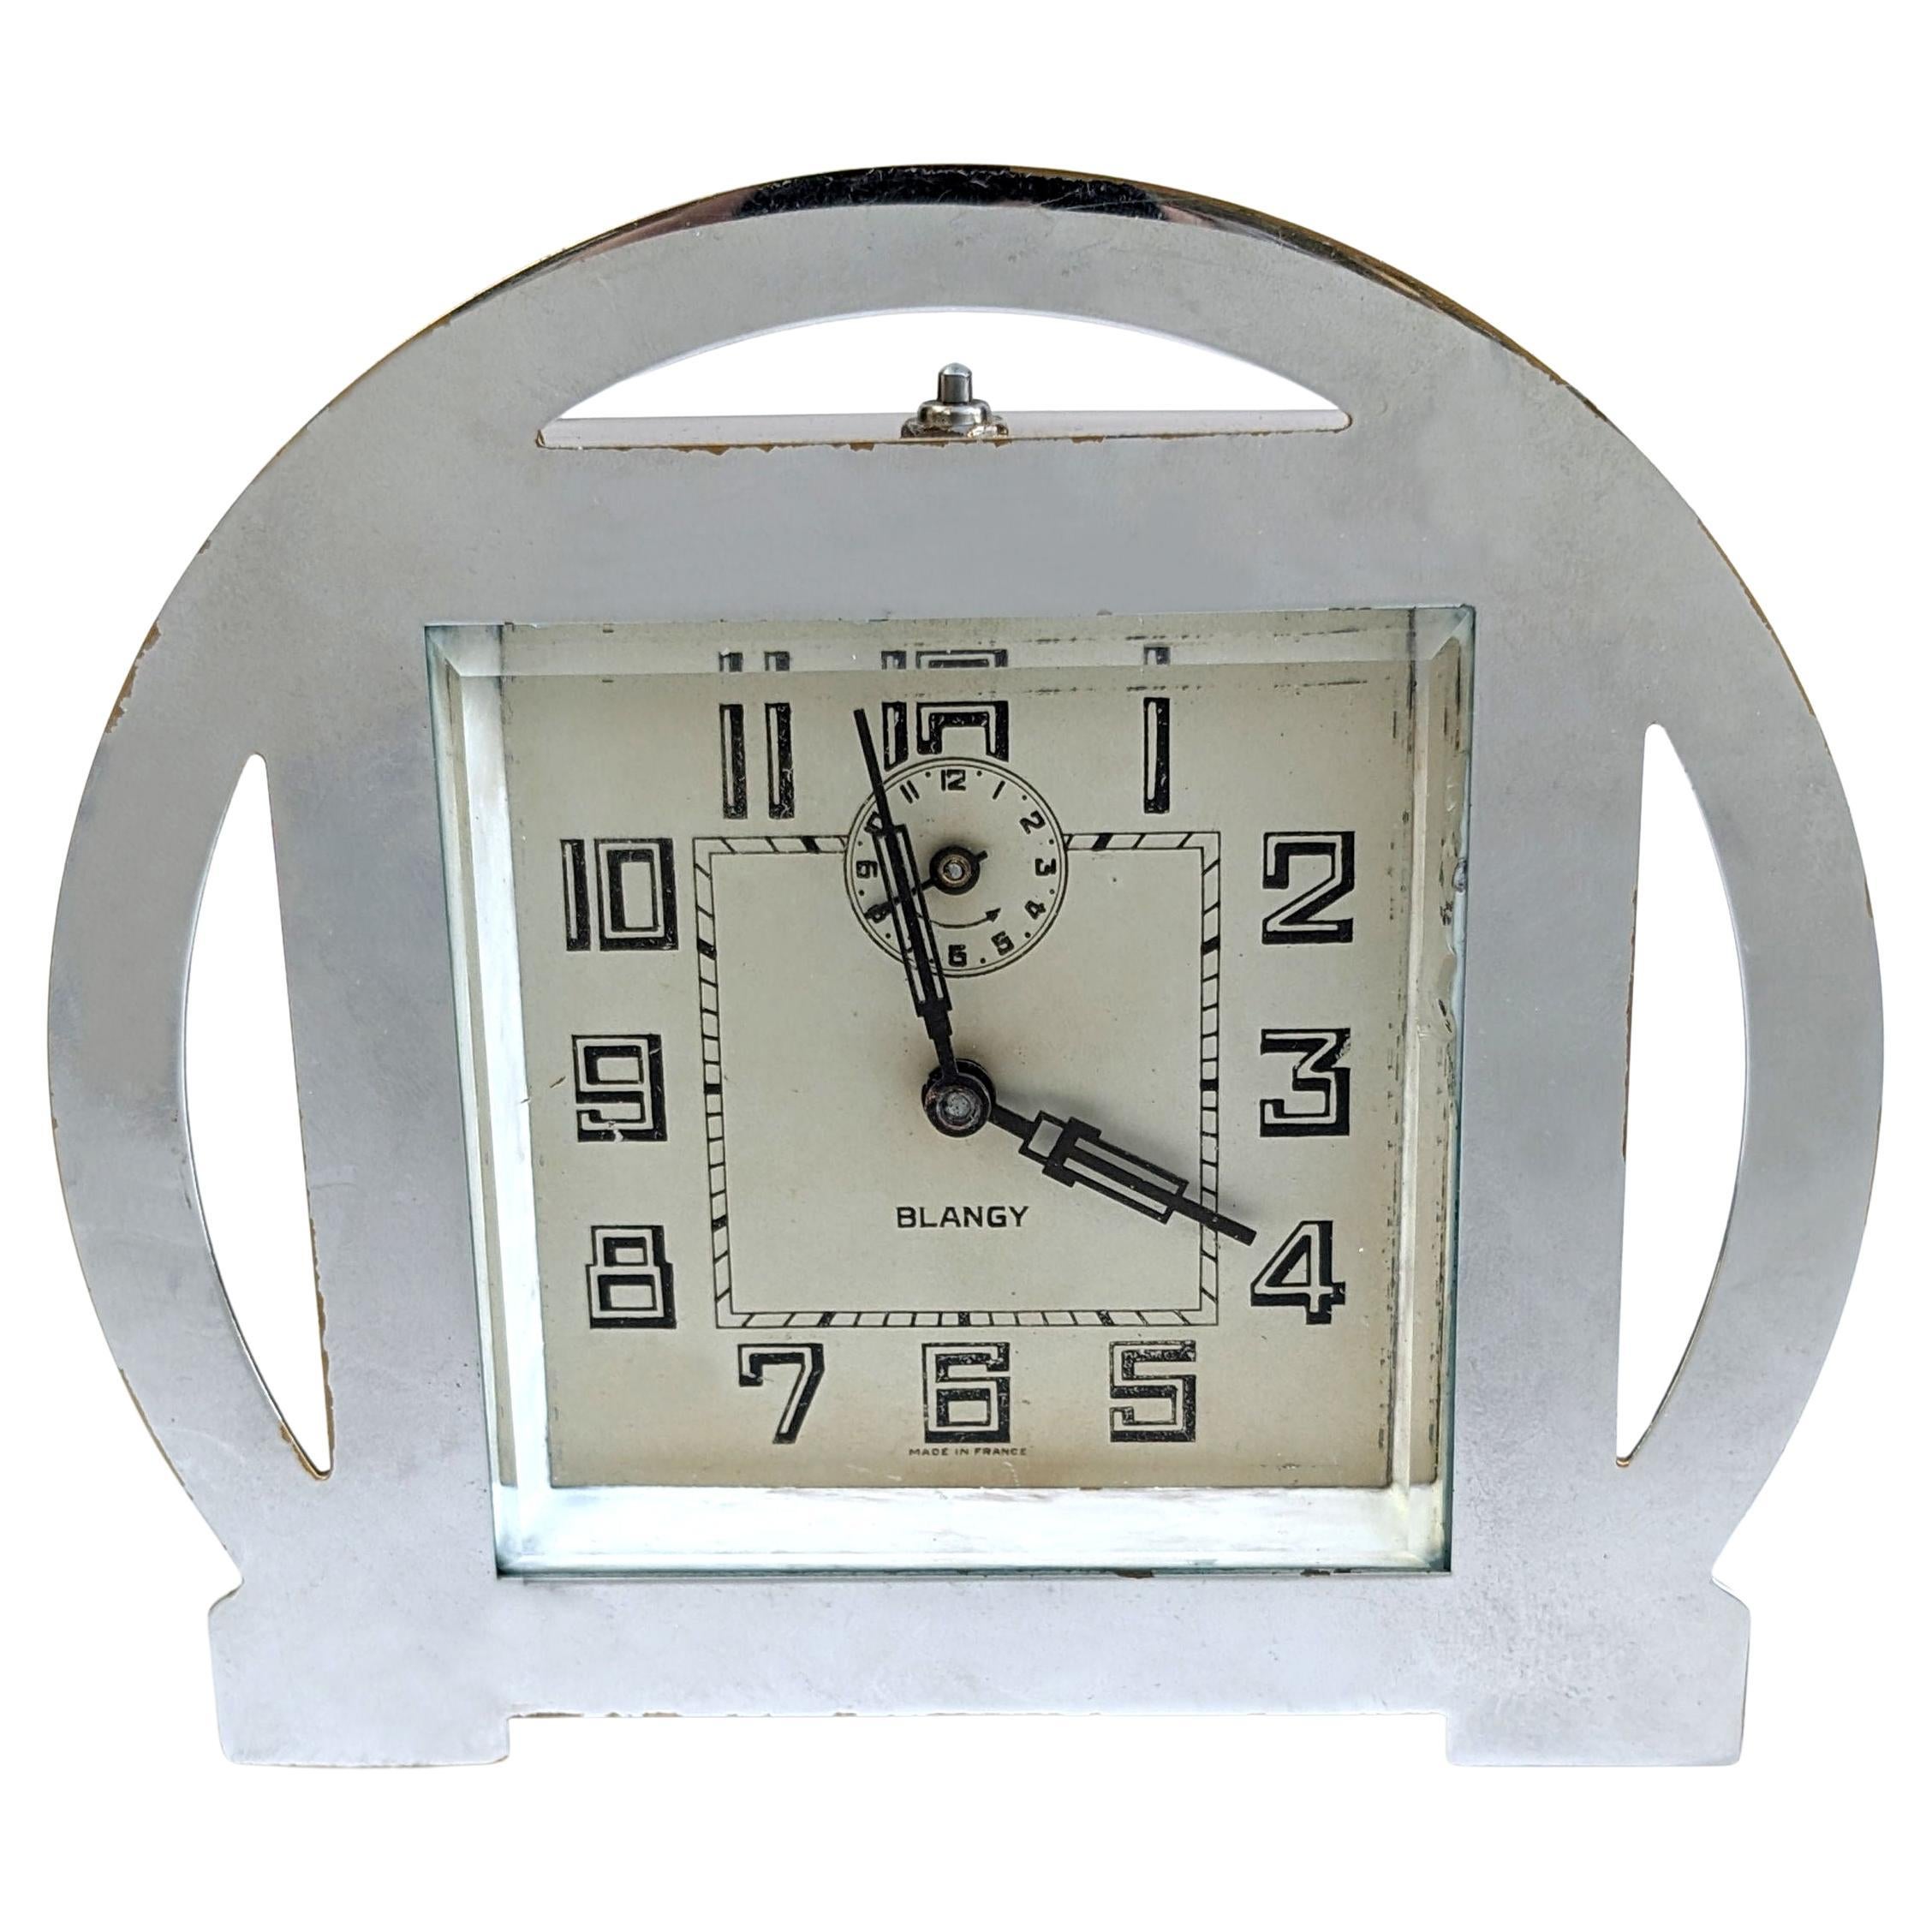 Art Deco Chrome Manual Clock By Blangy, French, c1930